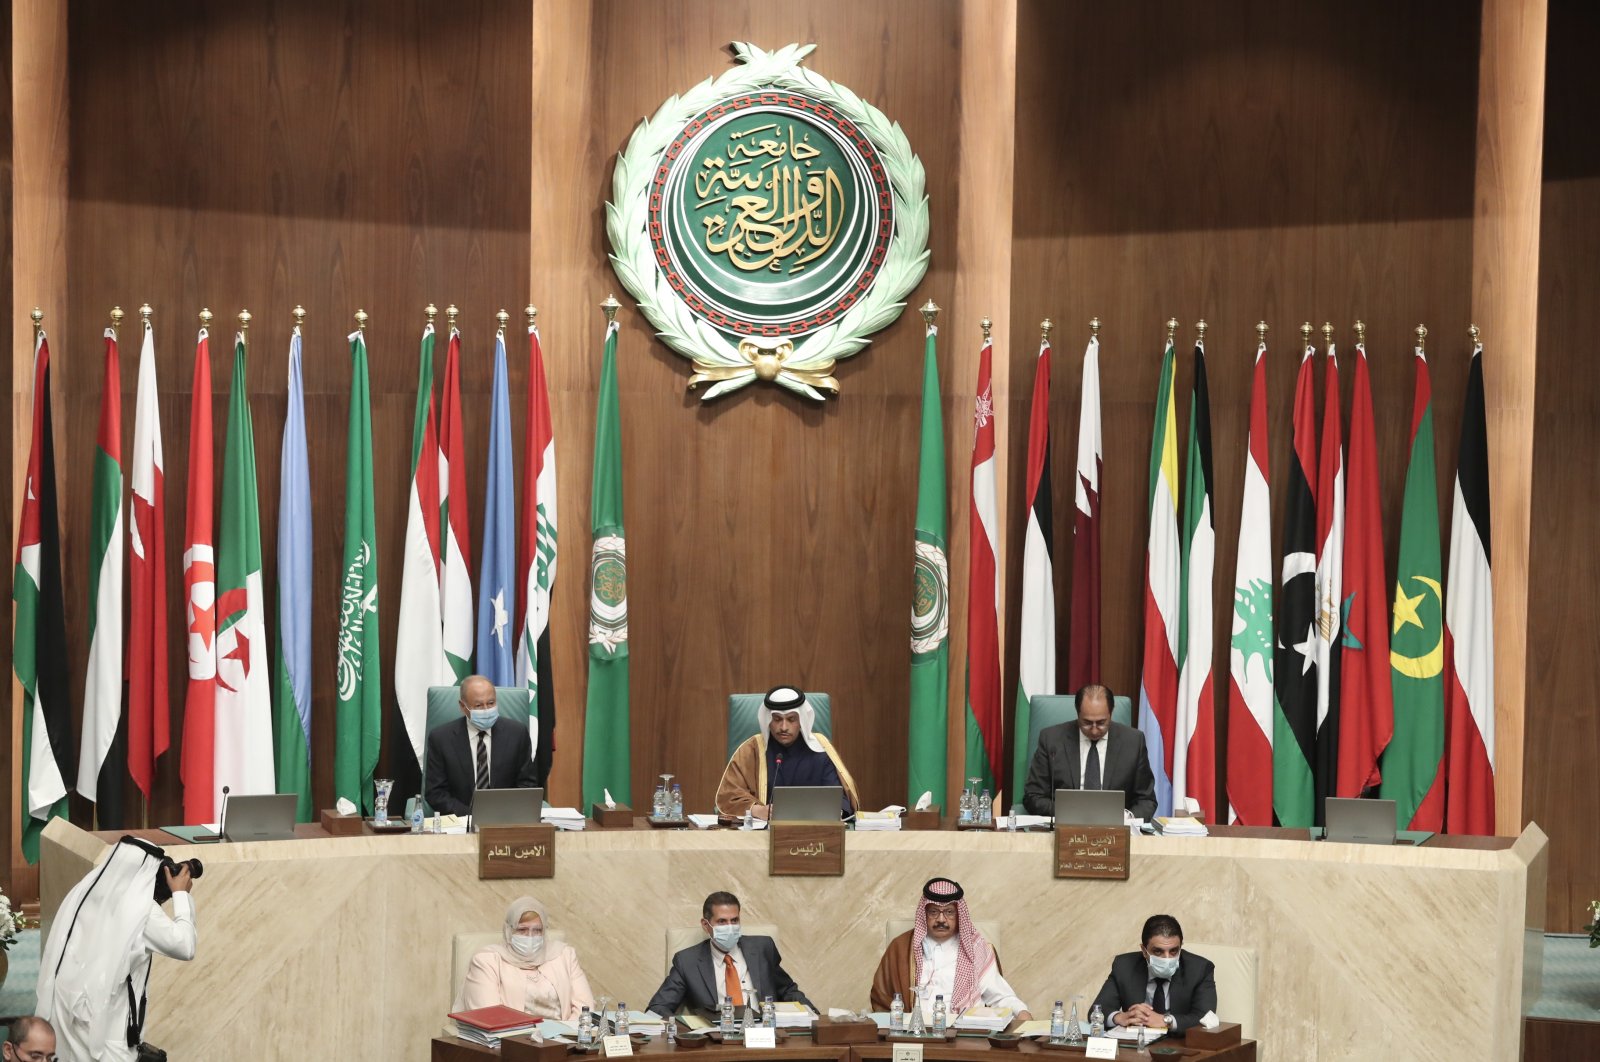 Secretary-General of the Arab League Ahmed Aboul Gheit (L) Qatari Deputy Prime Minister and Minister of Foreign Affairs Sheikh Mohammed bin Abdul Rahman Al Thani (C) and Assistant Secretary General responsible of the League's Council, Ambassador Hossam Zaki (R) attend  the 155th ordinary session at the Arab League headquarters in Cairo, Egypt, March 3, 2021. (EPA Photo)